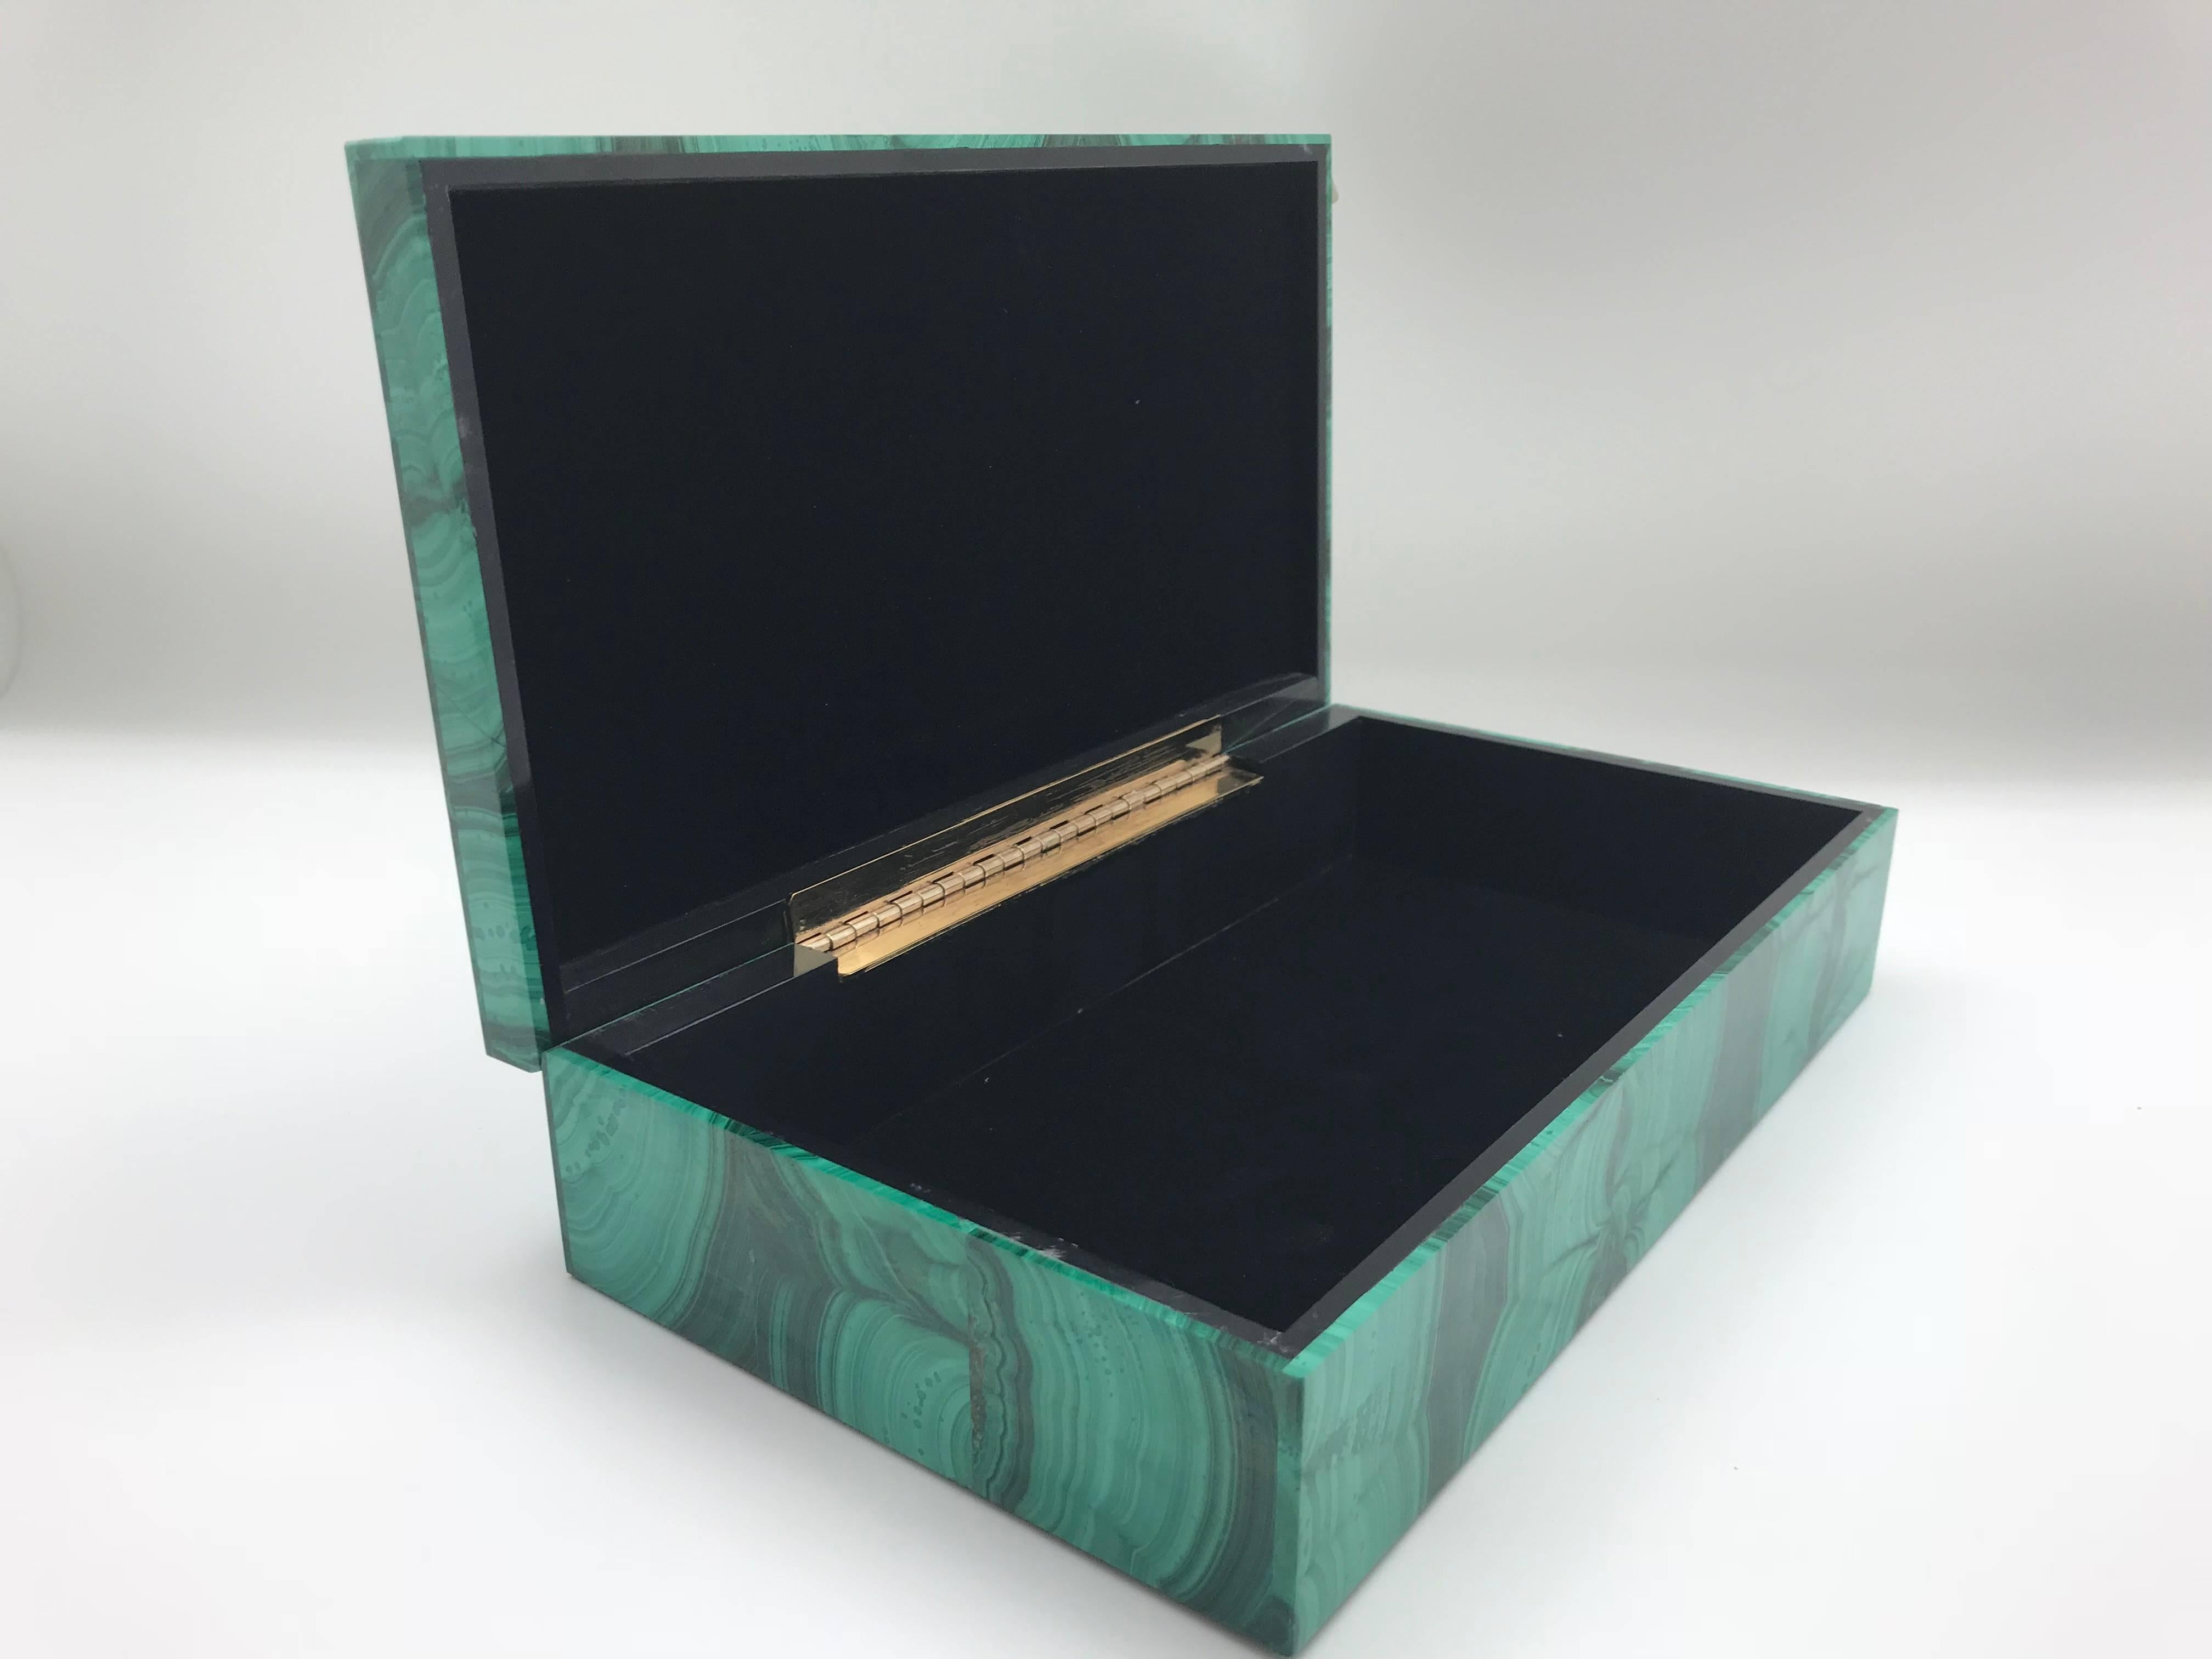 The malachite for this box was sourced from the Congo, where the finest quality of this mineral is currently found. Malachite from the 18th and 19th century was also sourced from Russia. Boxes, such as this, were typically brought back from Europe